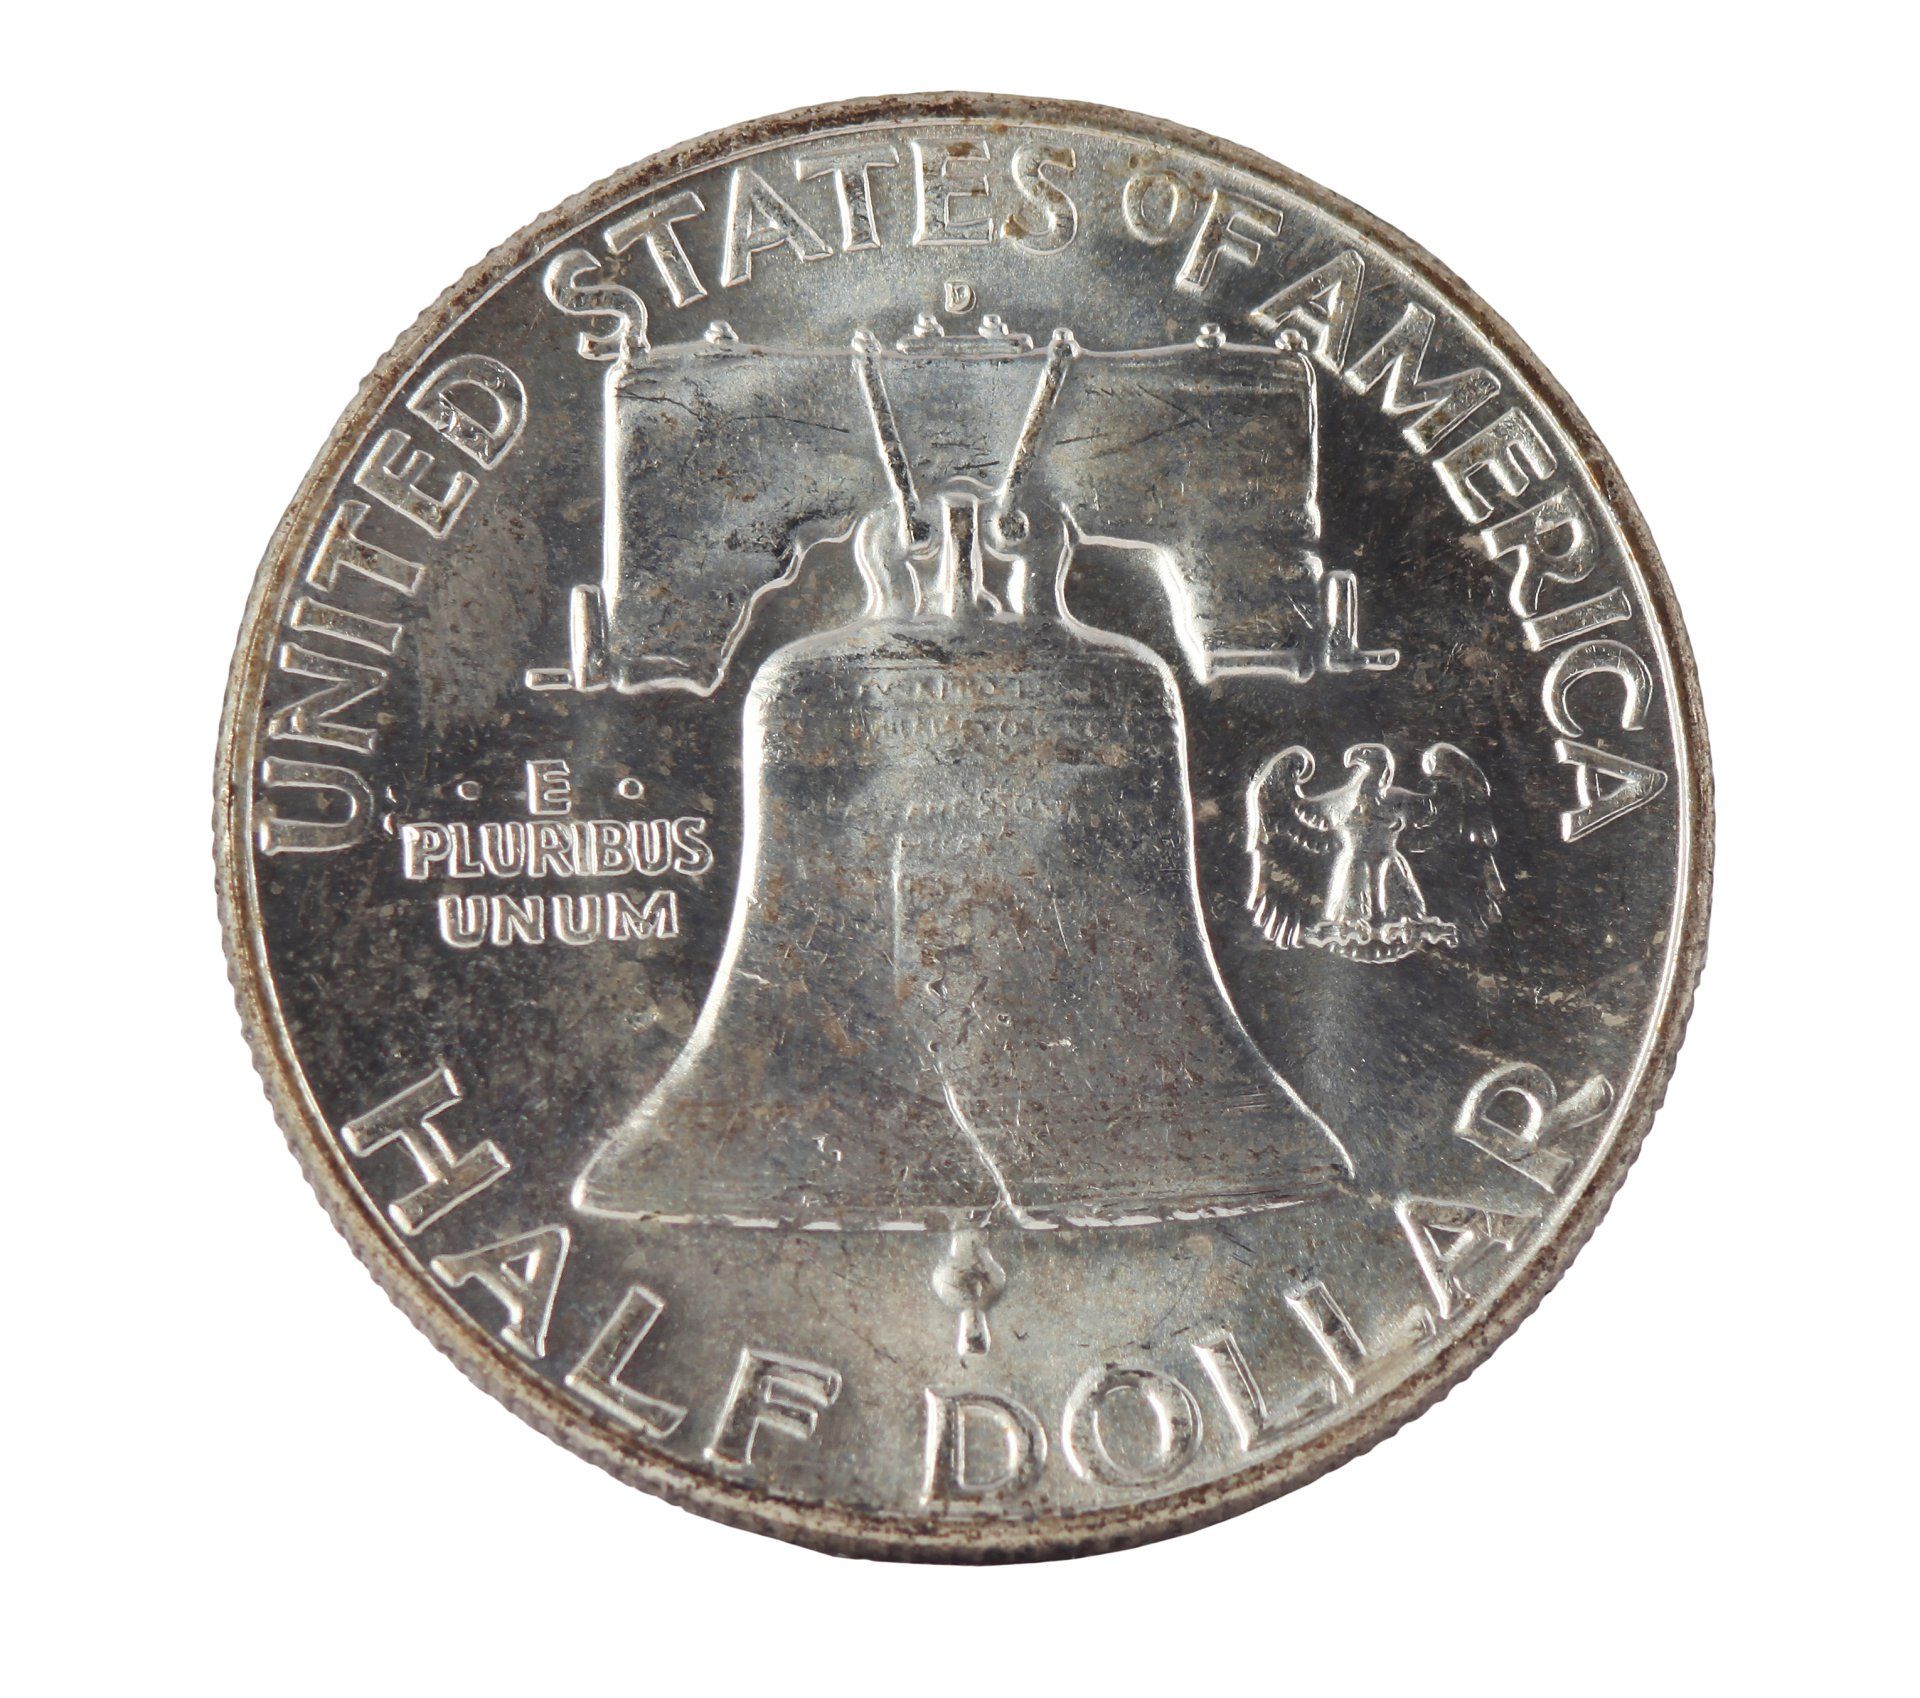 Reverse of the Franklin Half Dollar from the Denver Mint